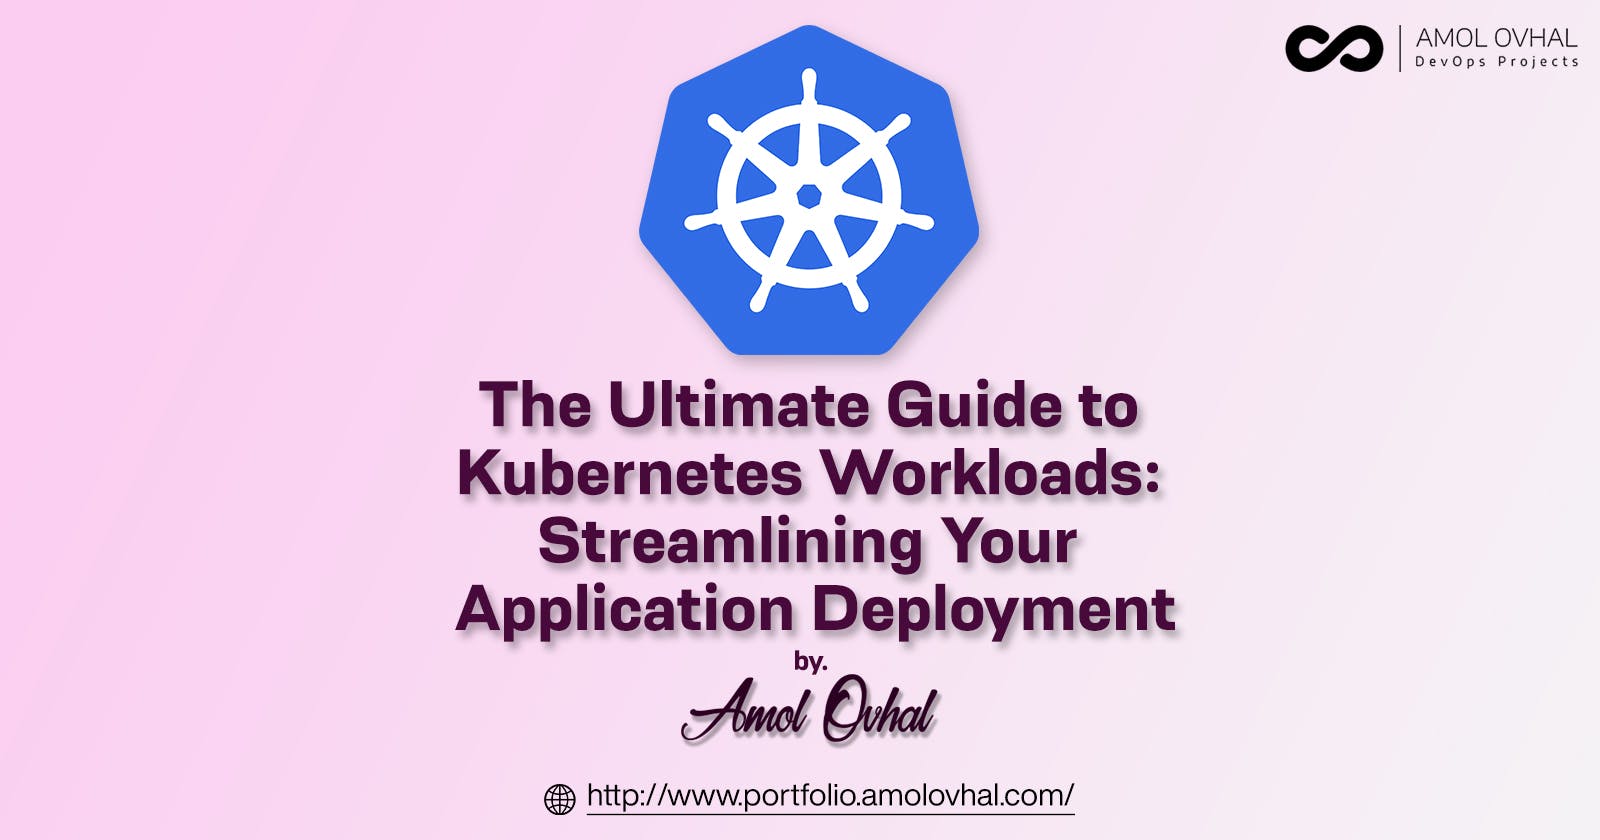 The Ultimate Guide to Kubernetes Workloads: Streamlining Your Application Deployment